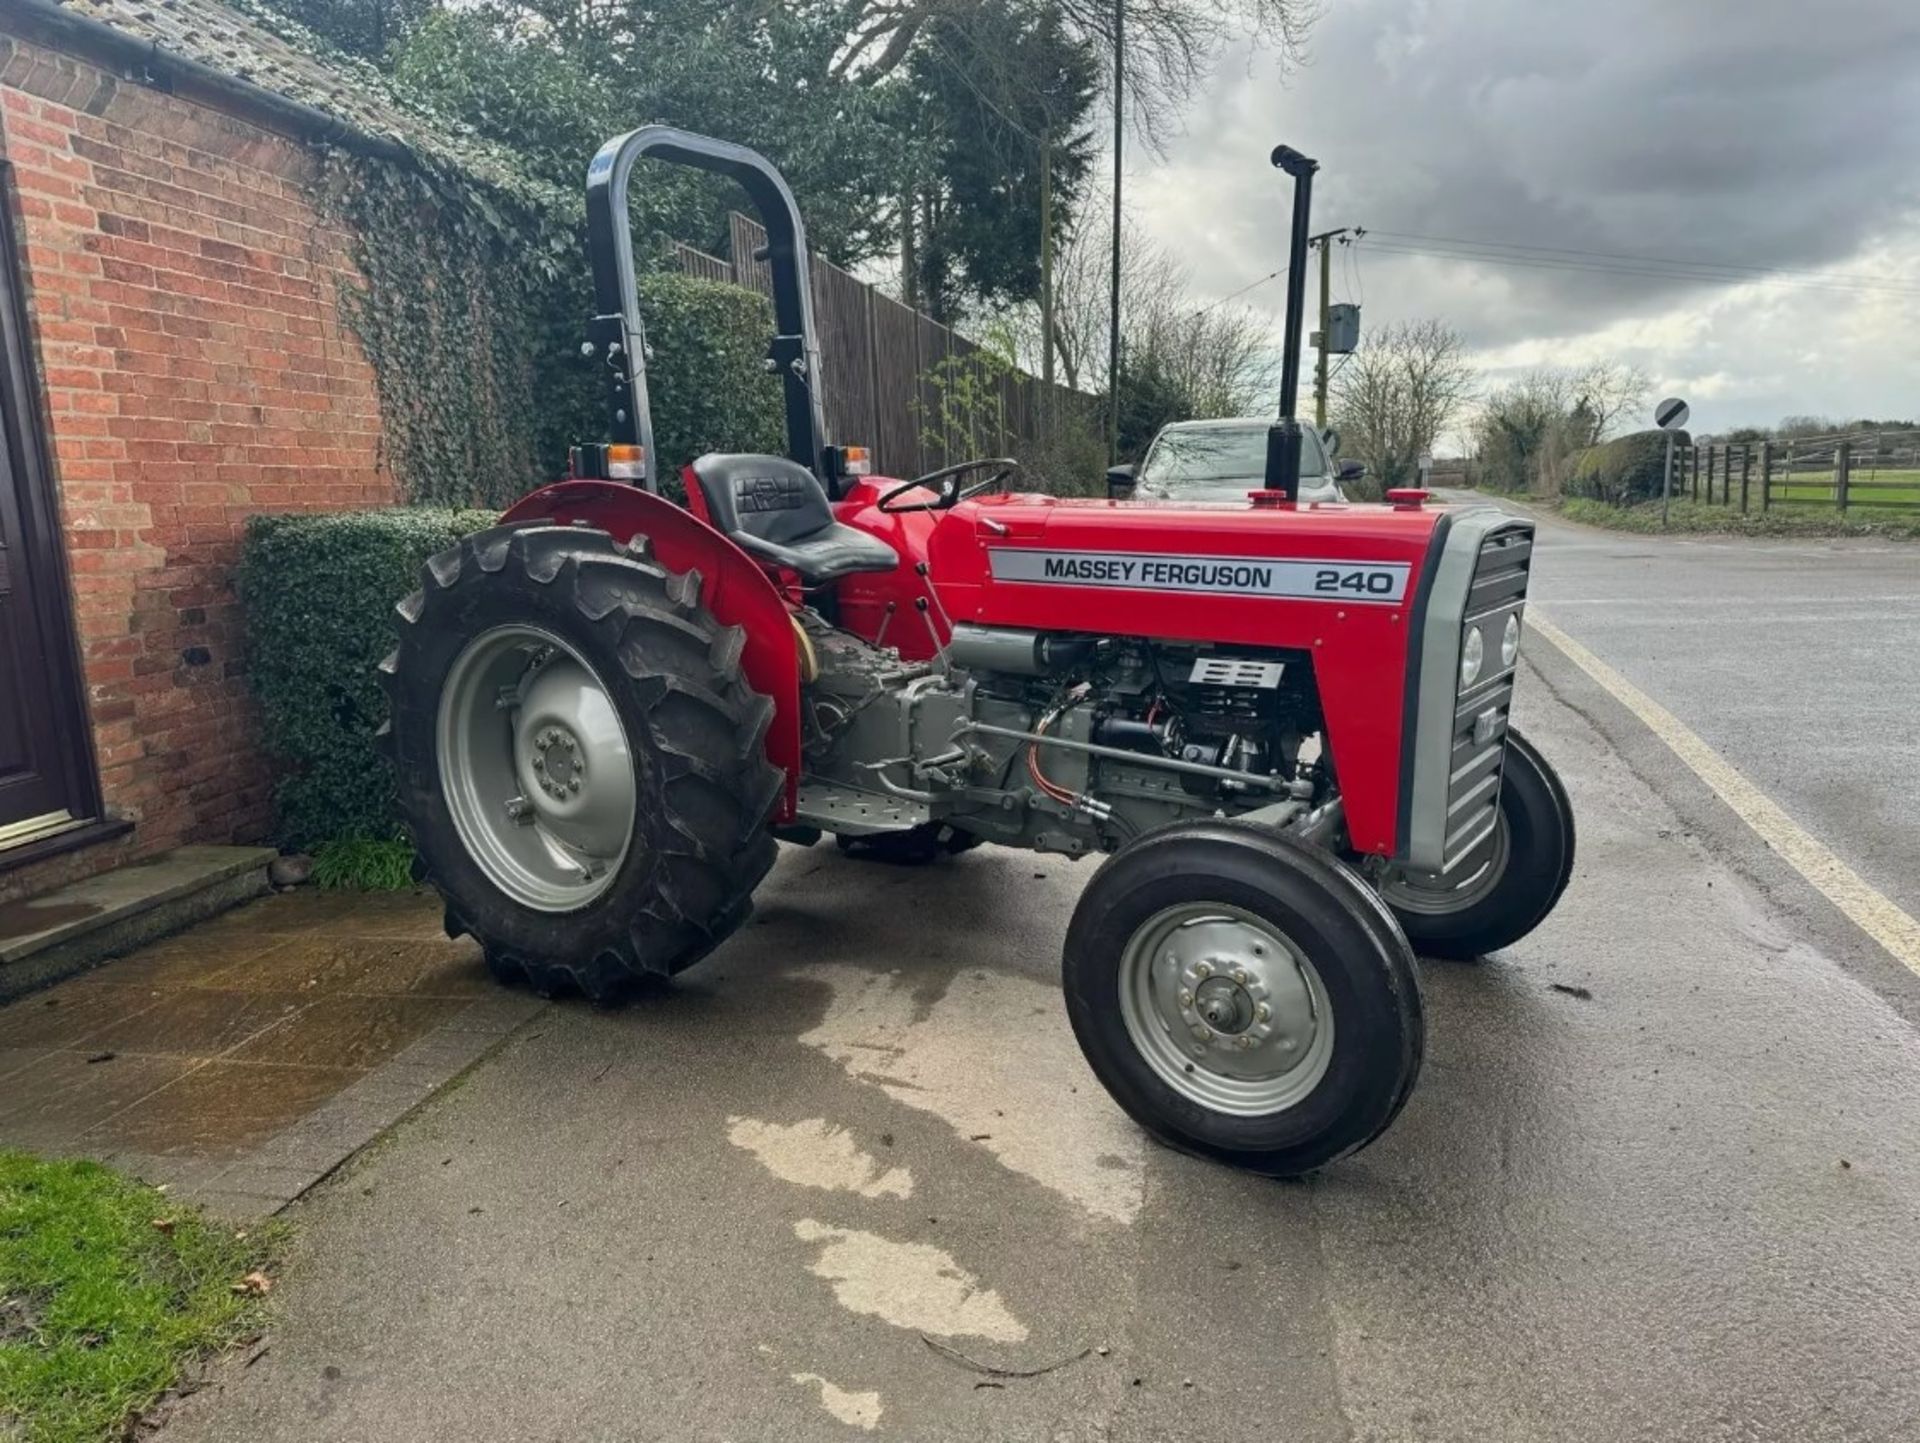 MASSEY FERGUSON 240 TRACTOR, YEAR 1981, THIS TRACTOR HAS HAD A FULL NUT & BOLT REBUILD *NO VAT* - Image 11 of 13